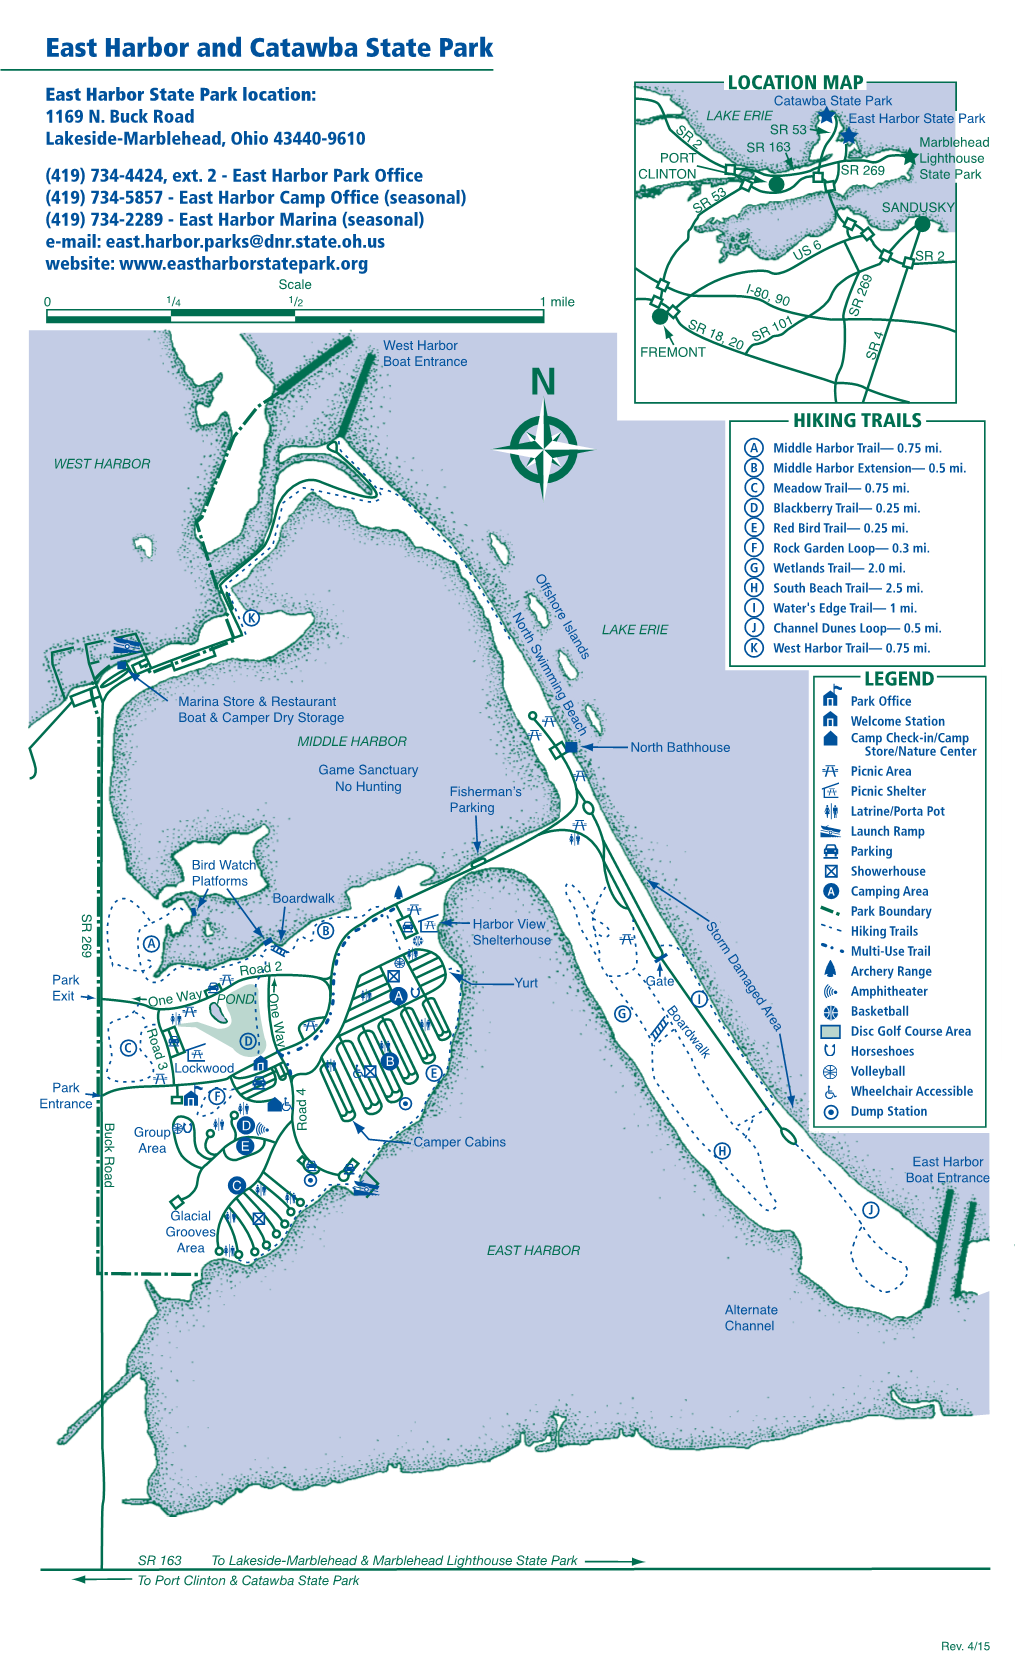 East Harbor and Catawba State Park LOCATION MAP East Harbor State Park Location: Catawba State Park 1169 N